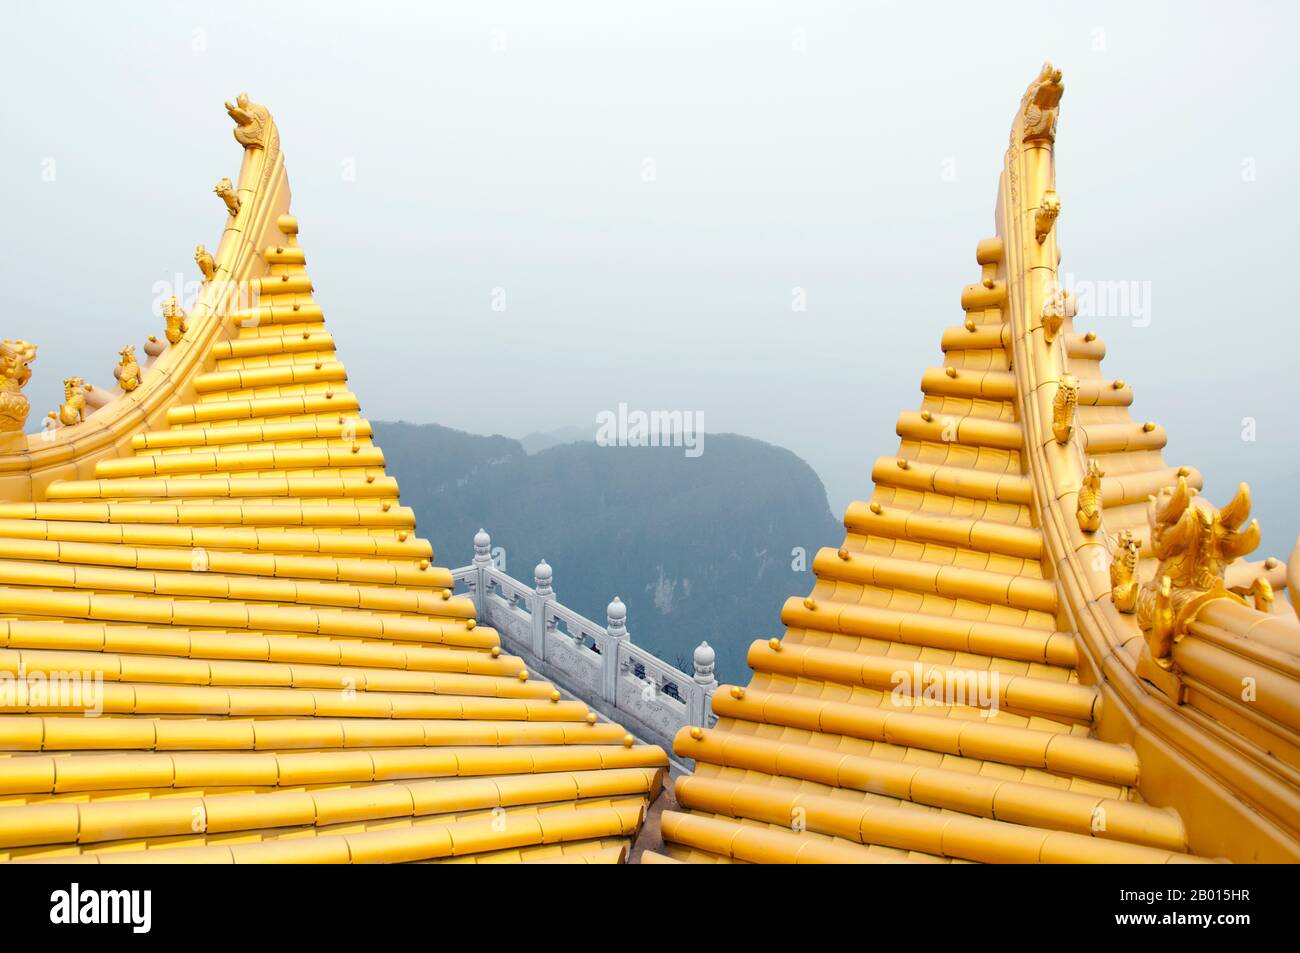 China: Mist engulfs the mountain at the Golden Summit (Jin Ding), Emeishan (Mount Emei), Sichuan Province.  At 3,099 metres (10,167 ft), Mt. Emei is the highest of the Four Sacred Buddhist Mountains of China. The patron bodhisattva of Emei is Samantabhadra, known in Chinese as Puxian. 16th and 17th century sources allude to the practice of martial arts in the monasteries of Mount Emei. Stock Photo